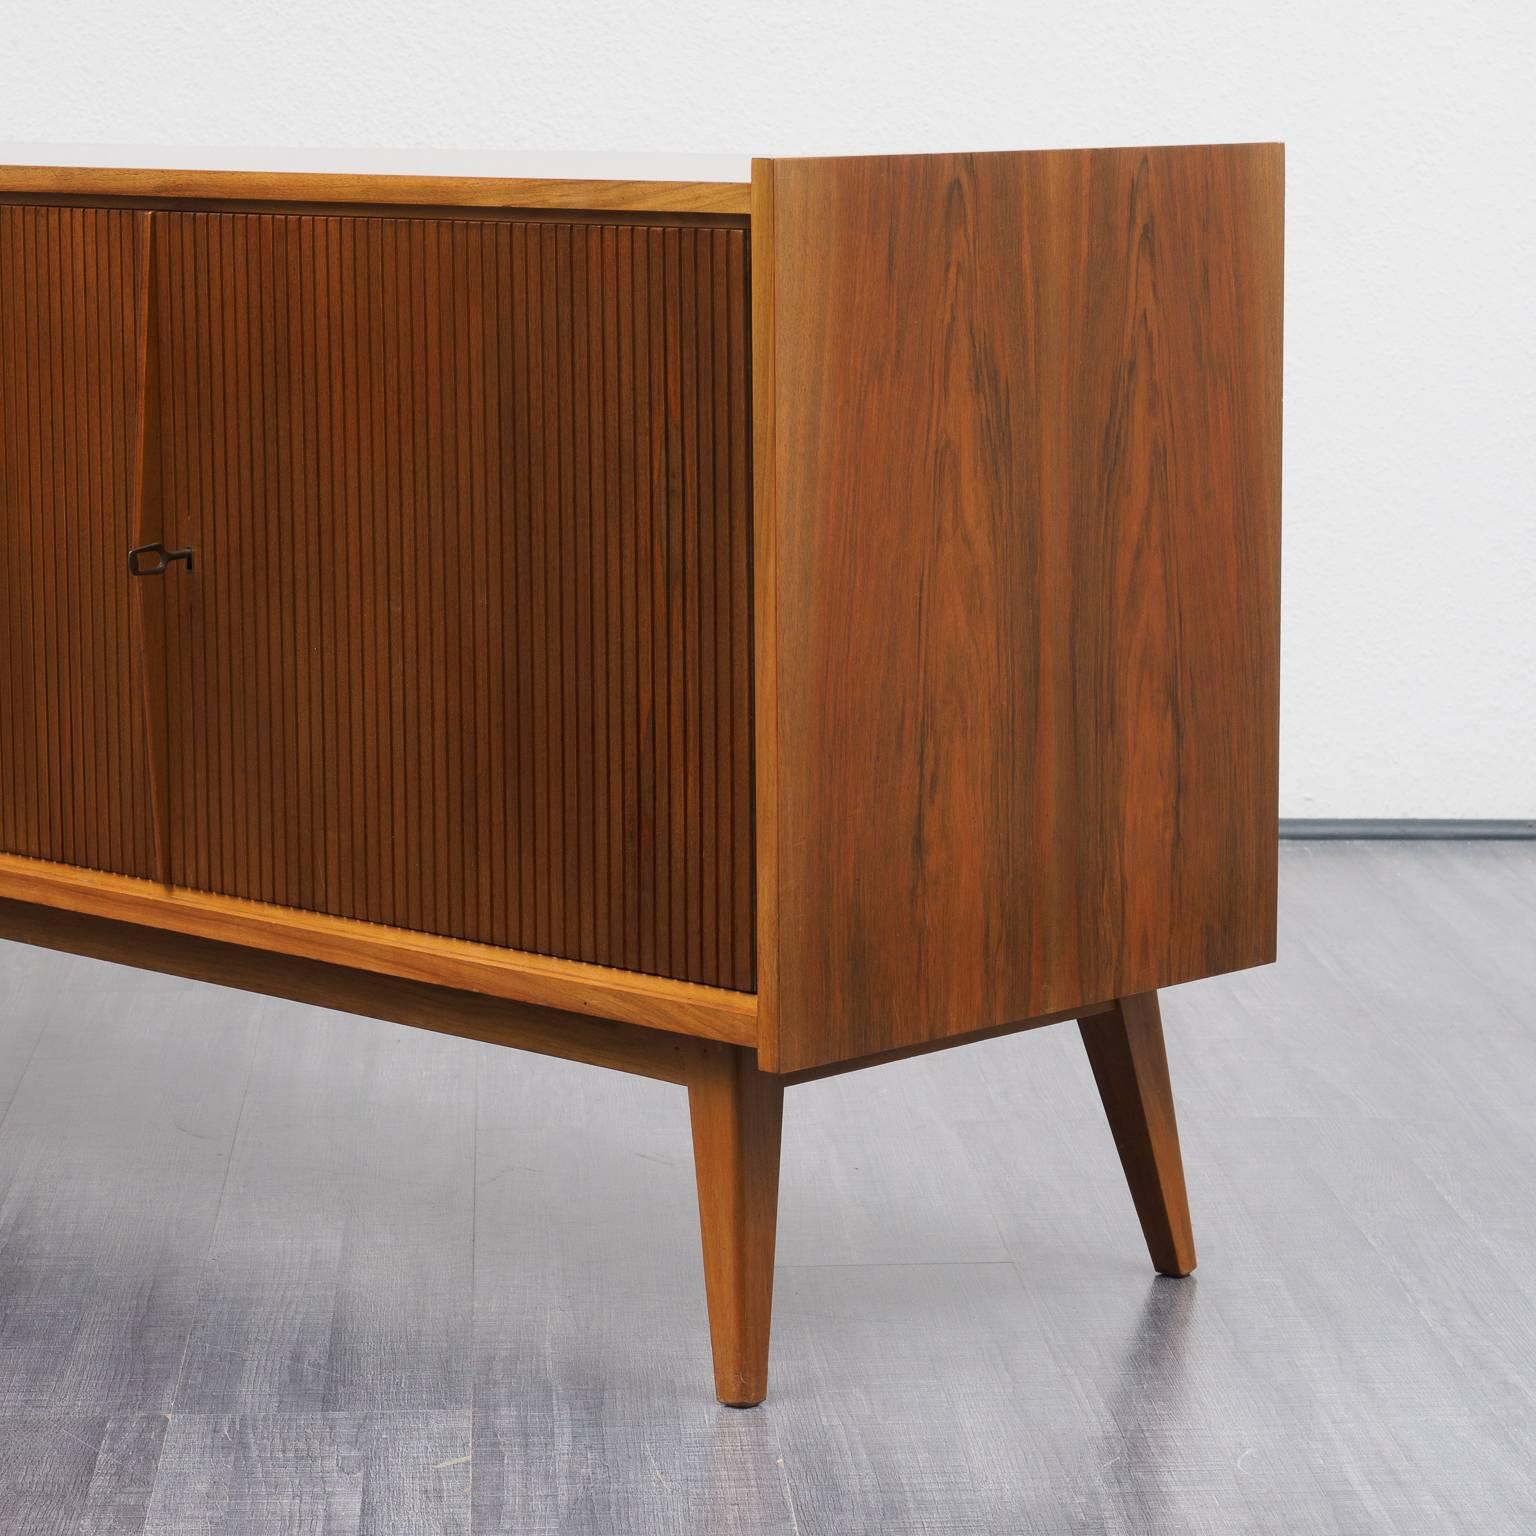 Mid-20th Century Rare 1950s Sideboard with Structured Doors, Completely Restored